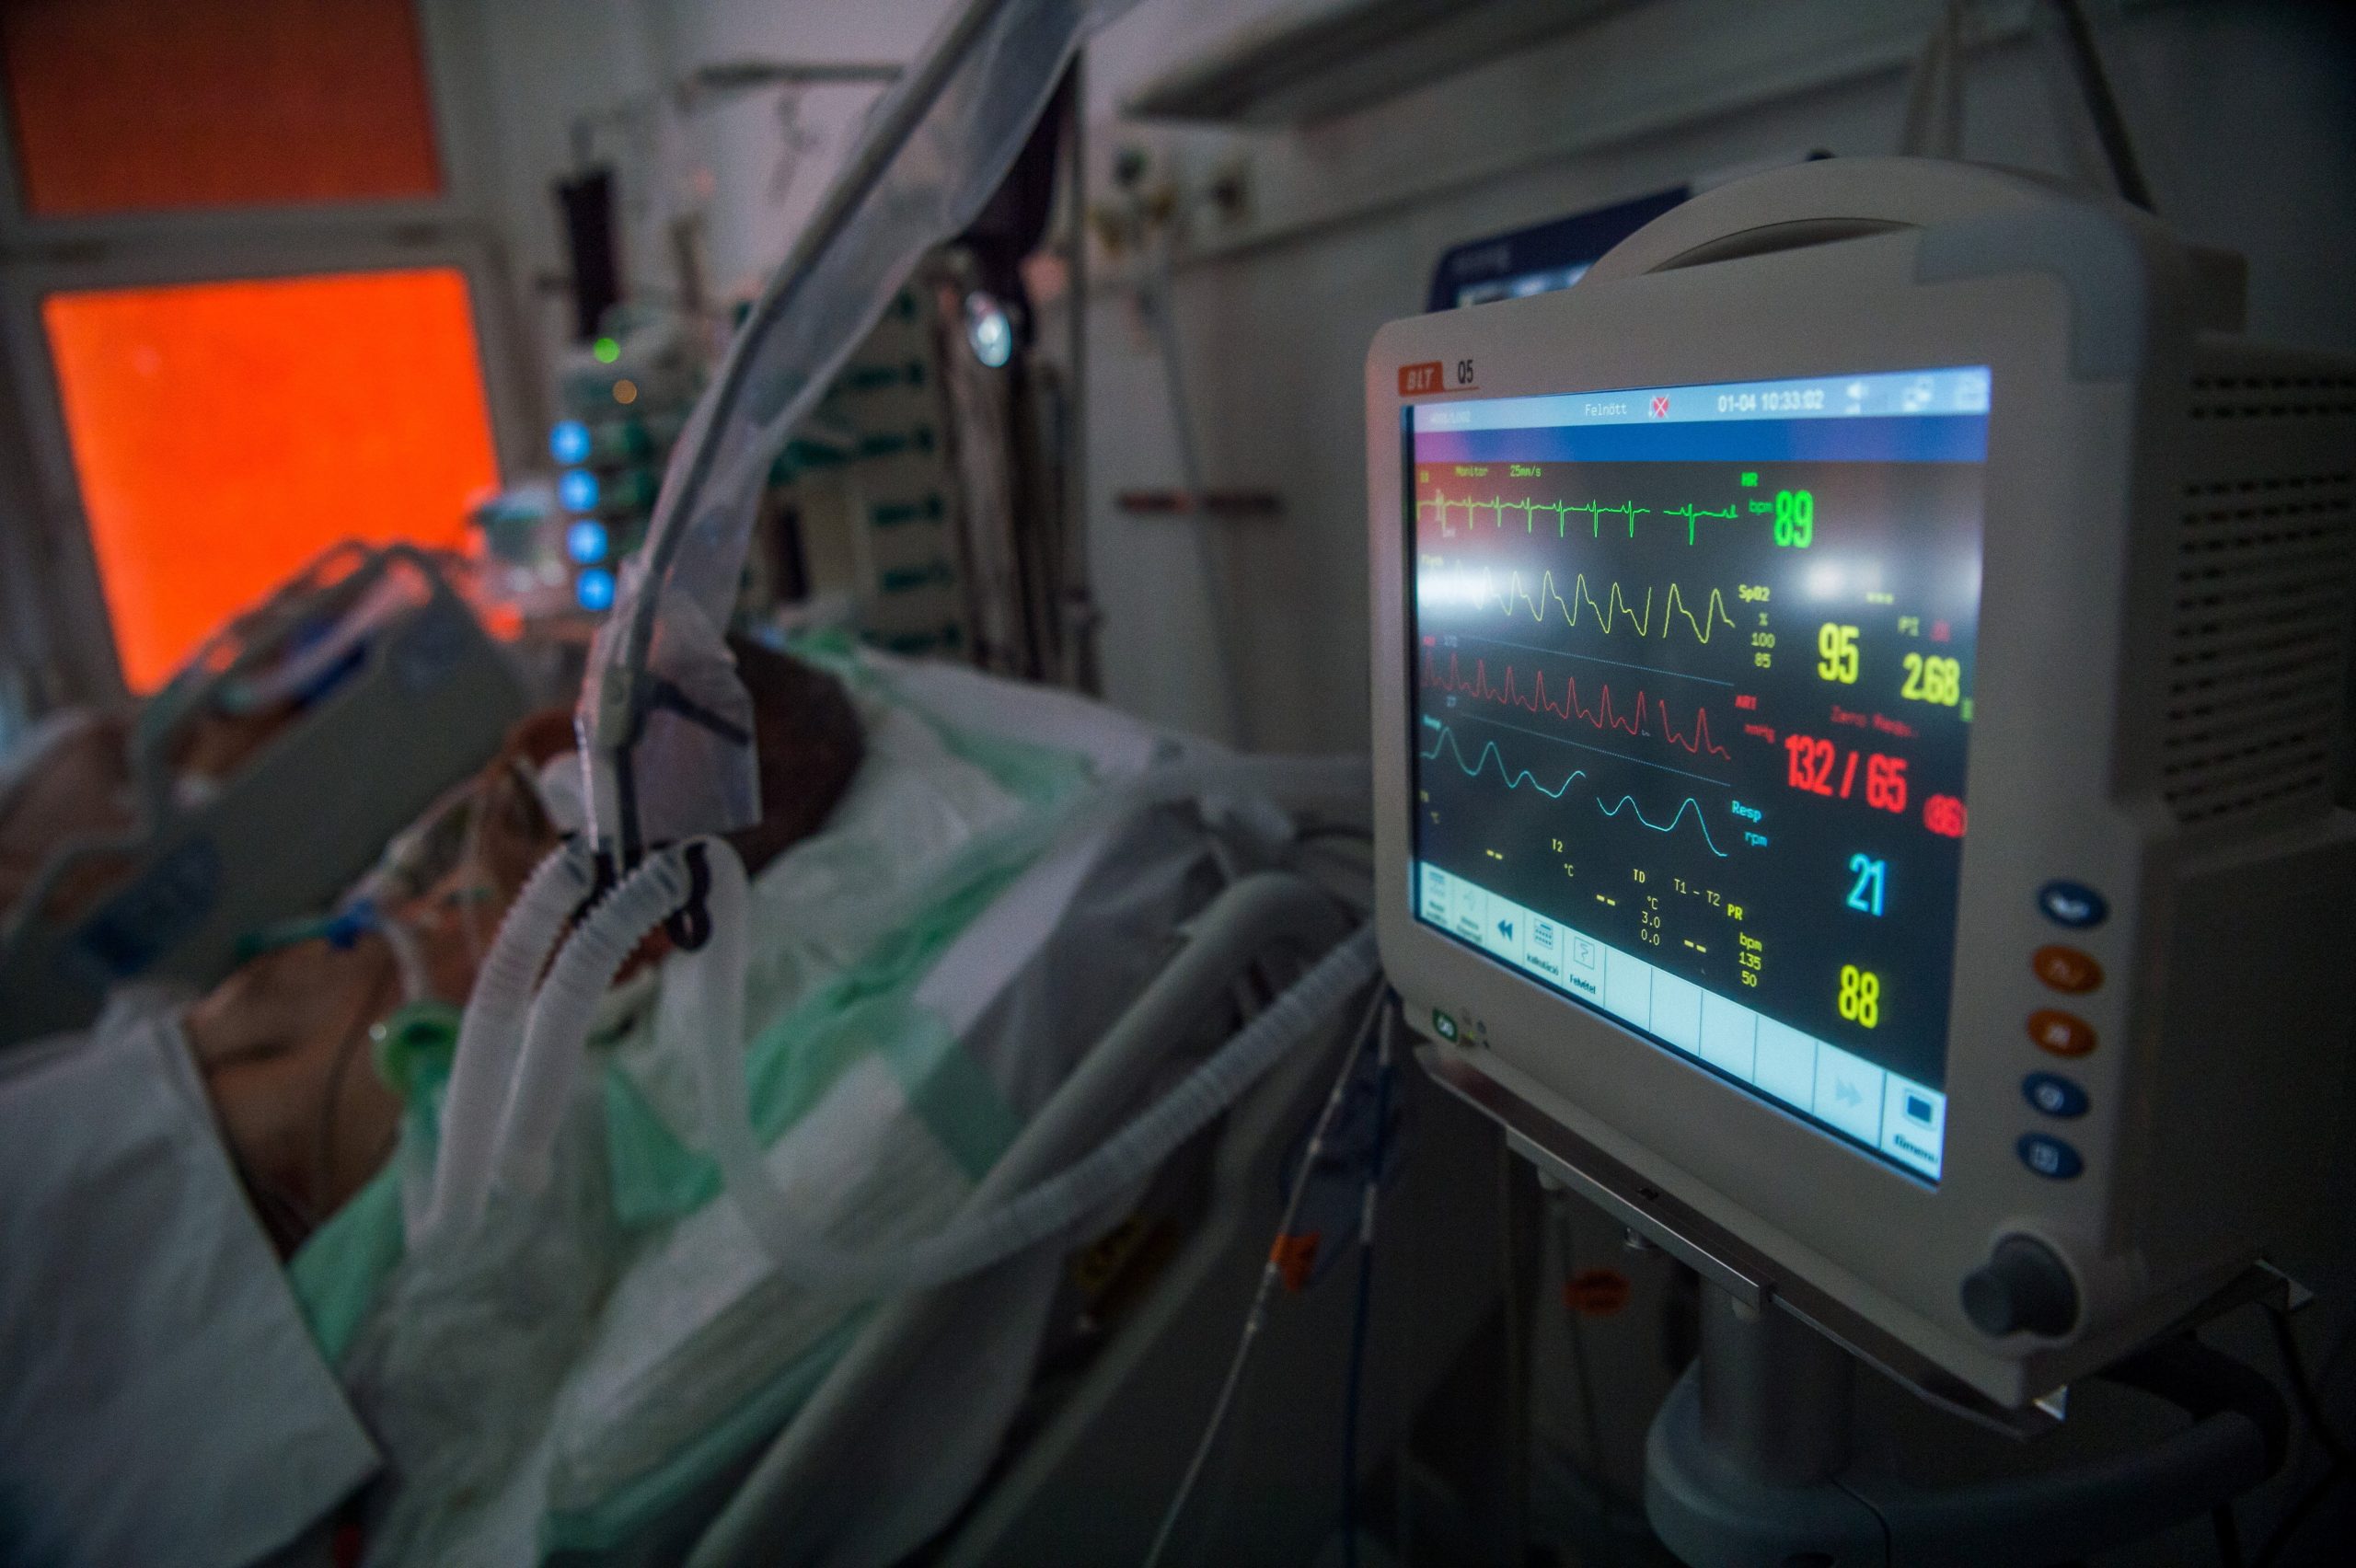 Hungary's Ventilator Death Rate 'Only' Around 80 Percent, Healthcare Center Says